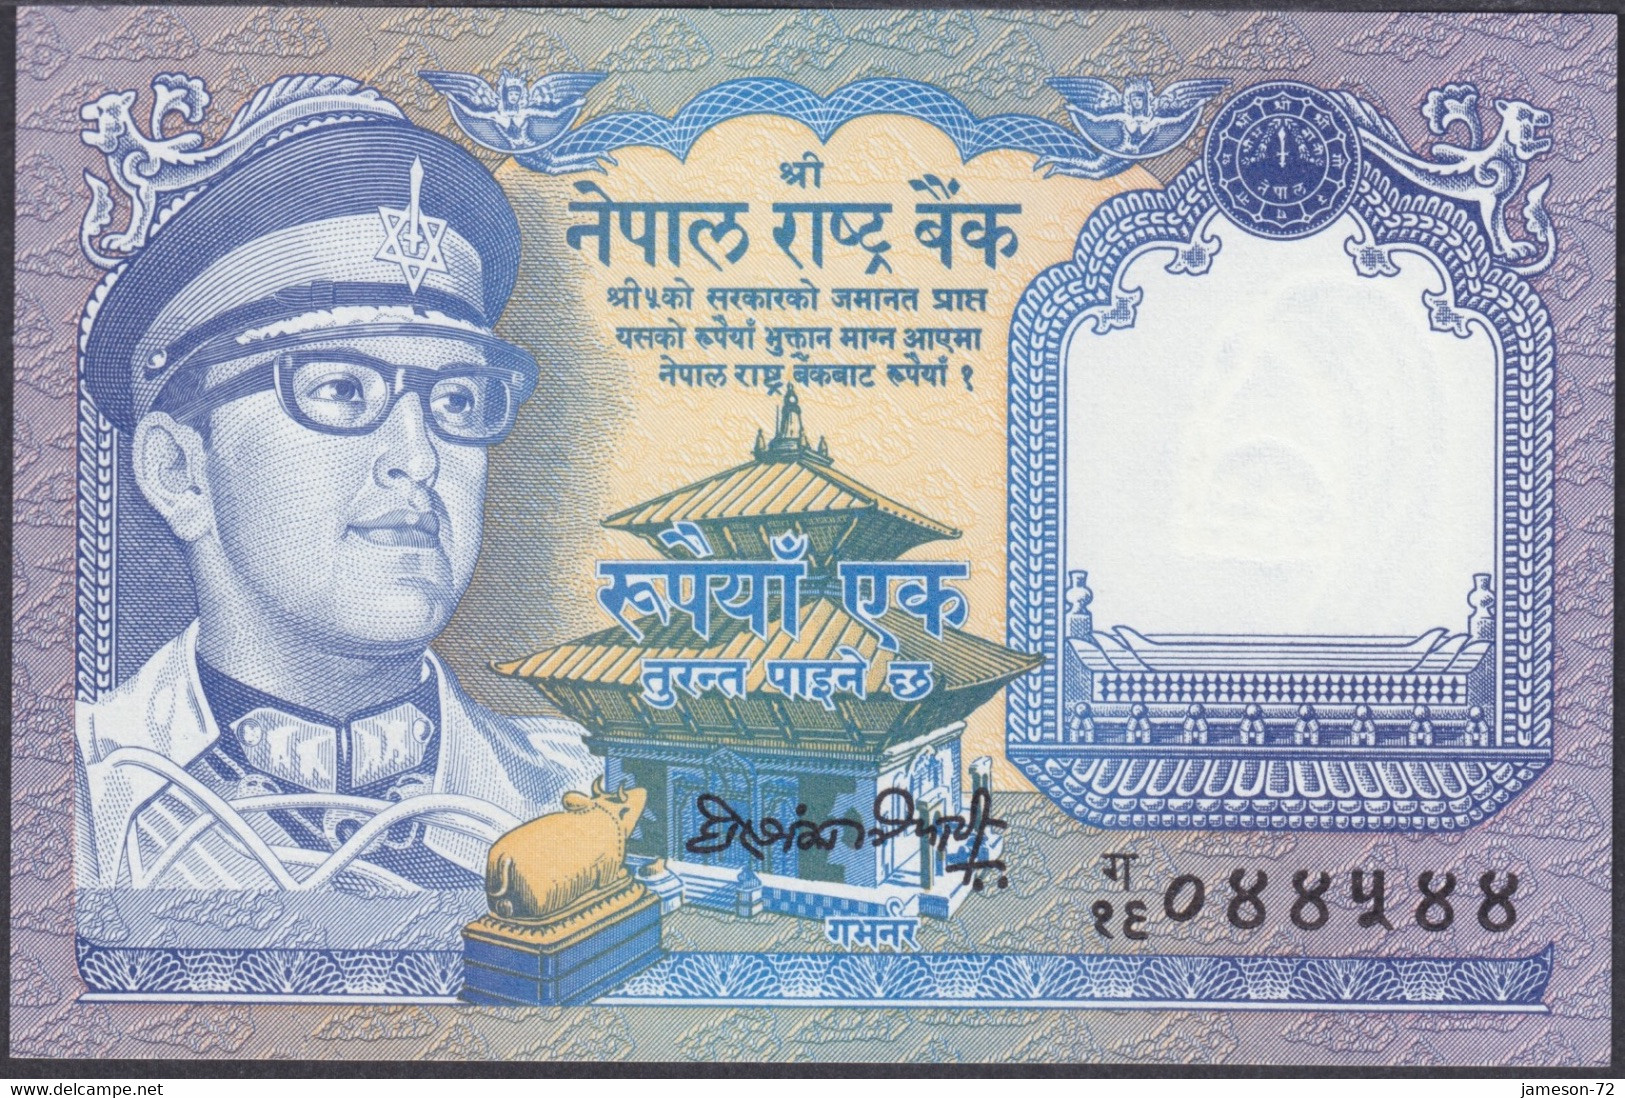 NEPAL - 1 Rupee ND (1974) P# 22 Asia Banknote - Edelweiss Coins - Nepal